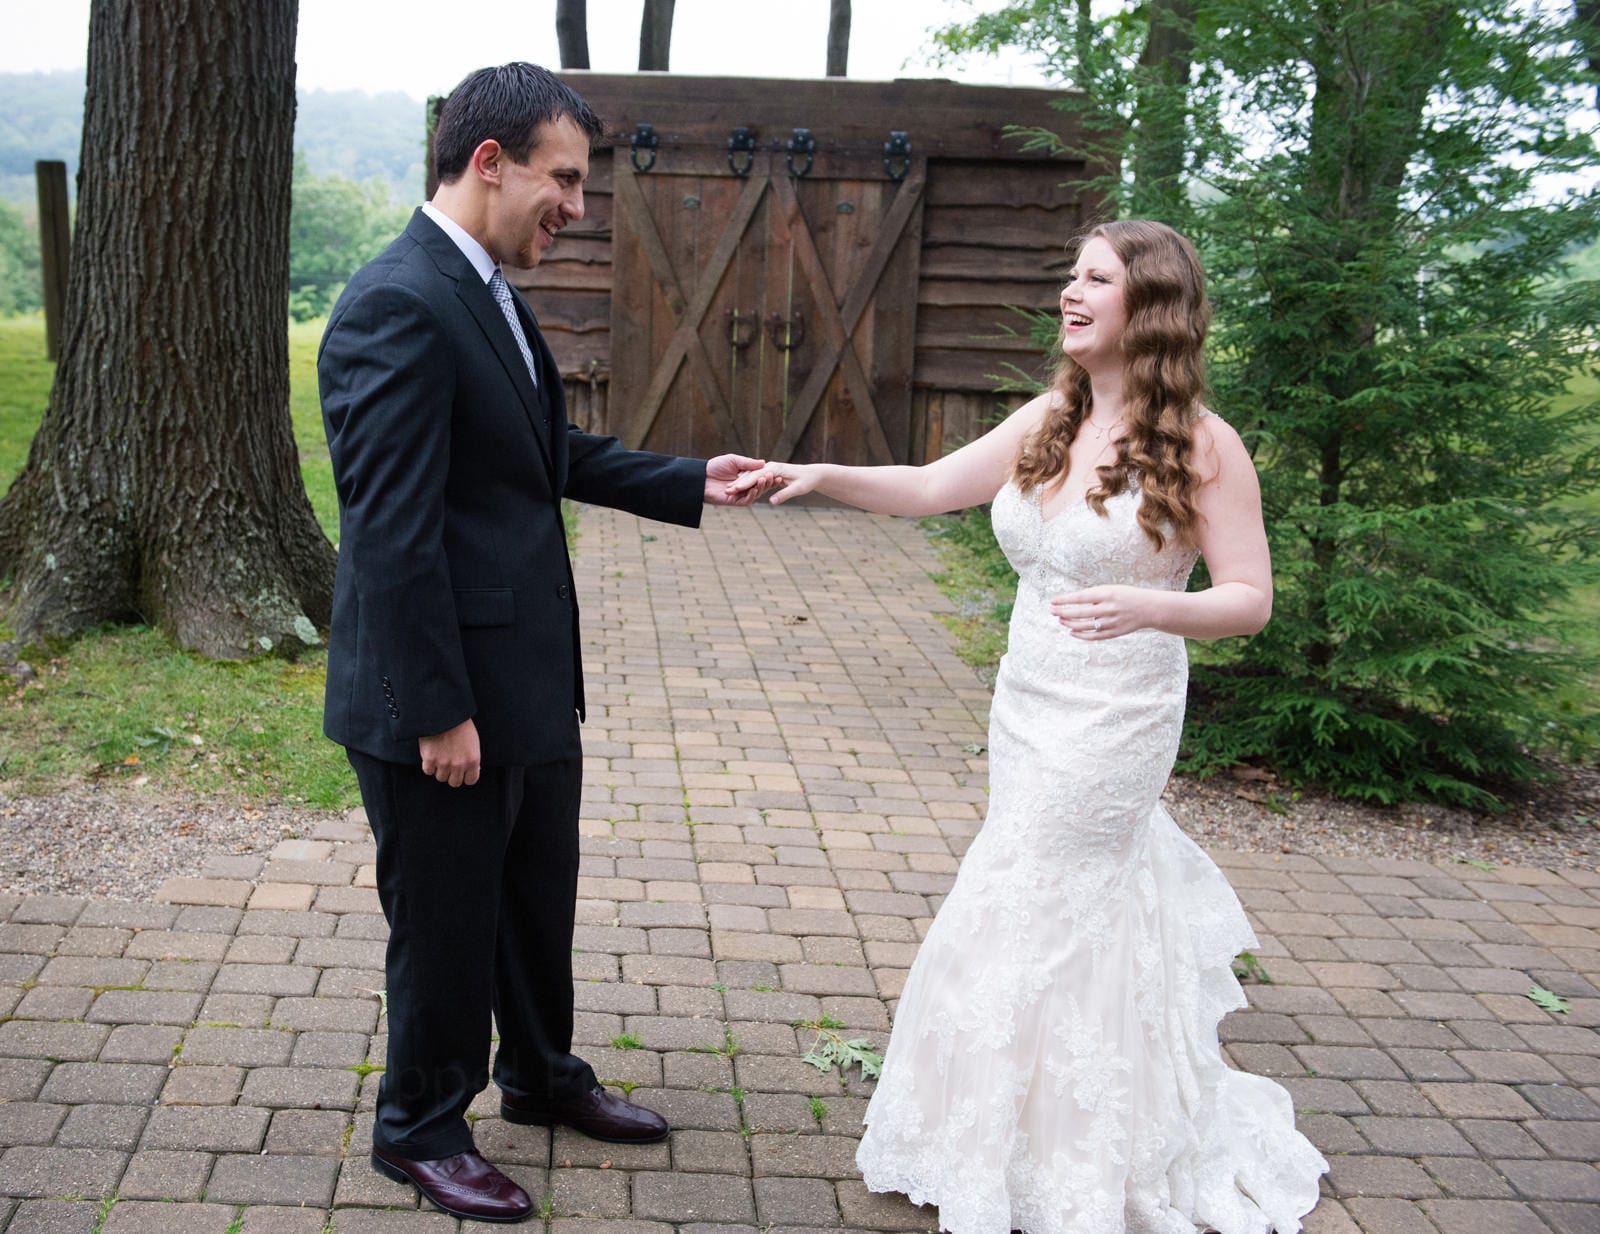 A bride and groom hold hands as the groom sees his bride for the first time. They're standing on a brick patio in front of a small wooden building during their Fall Wedding at Seven Springs.